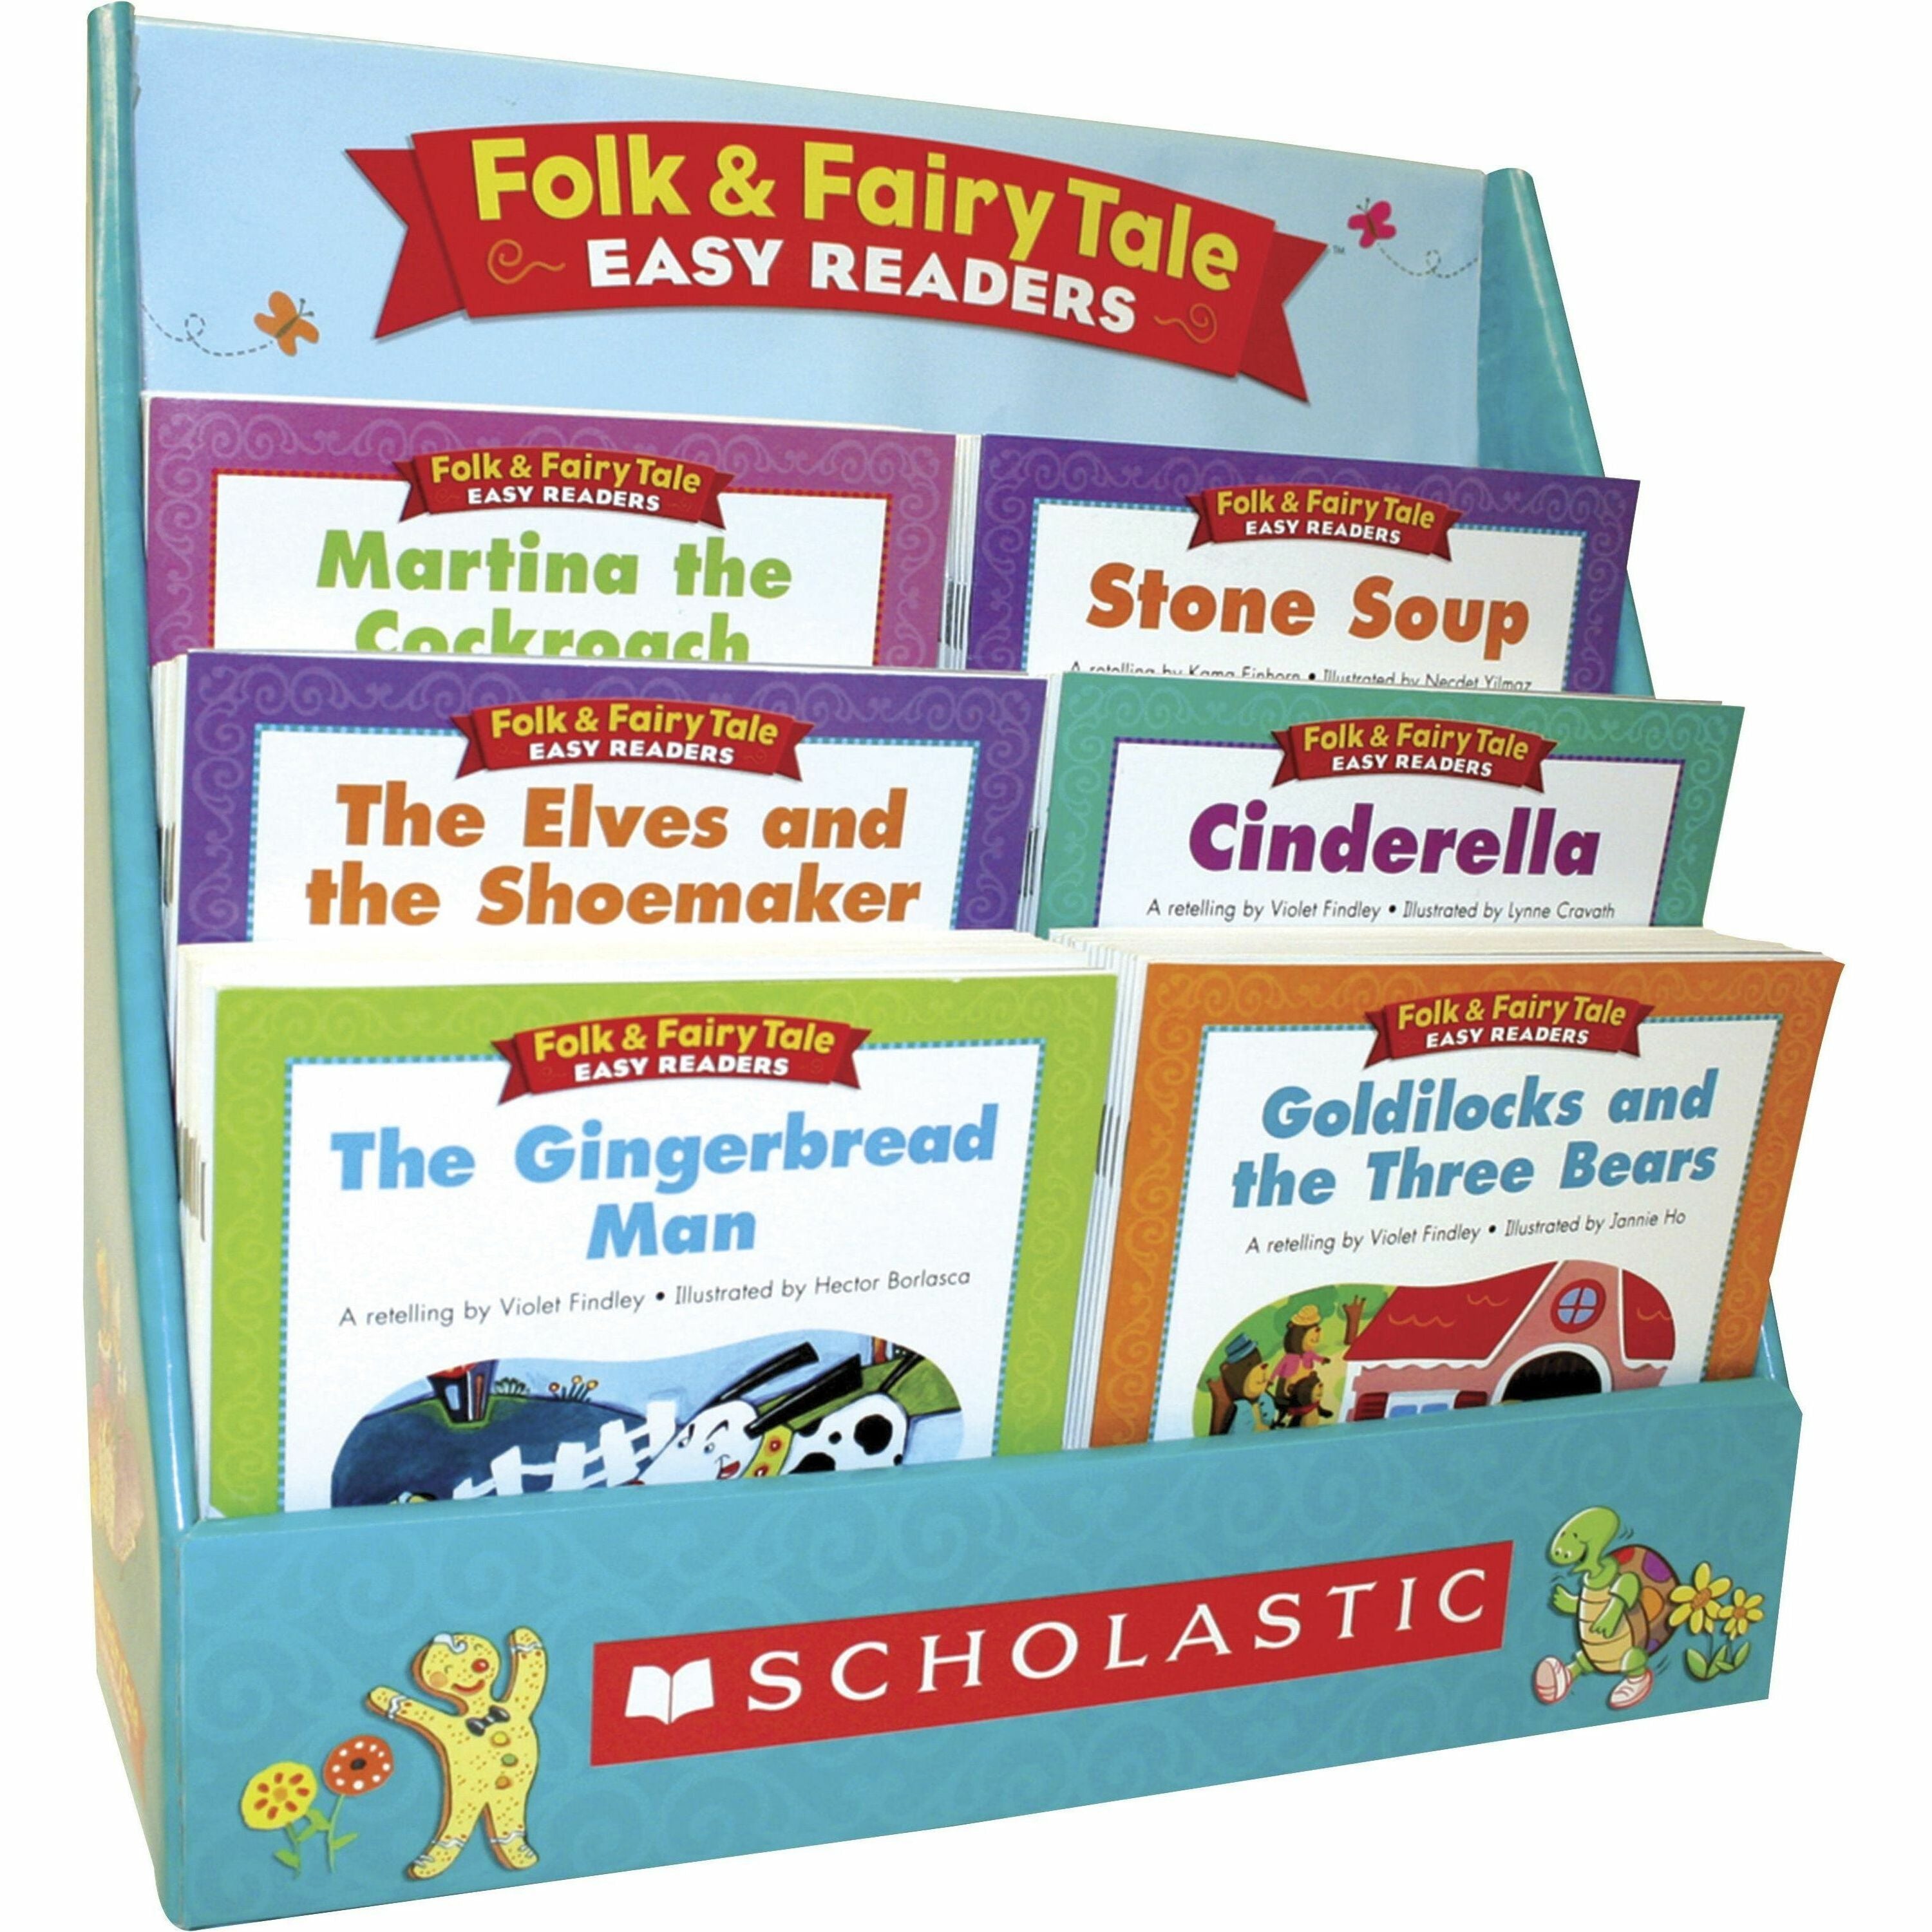 Scholastic Res. Grade K-2 Folk/Fairy Tale Book Collection Printed Book by Liza Charlesworth - Book - Grade K-2 - 